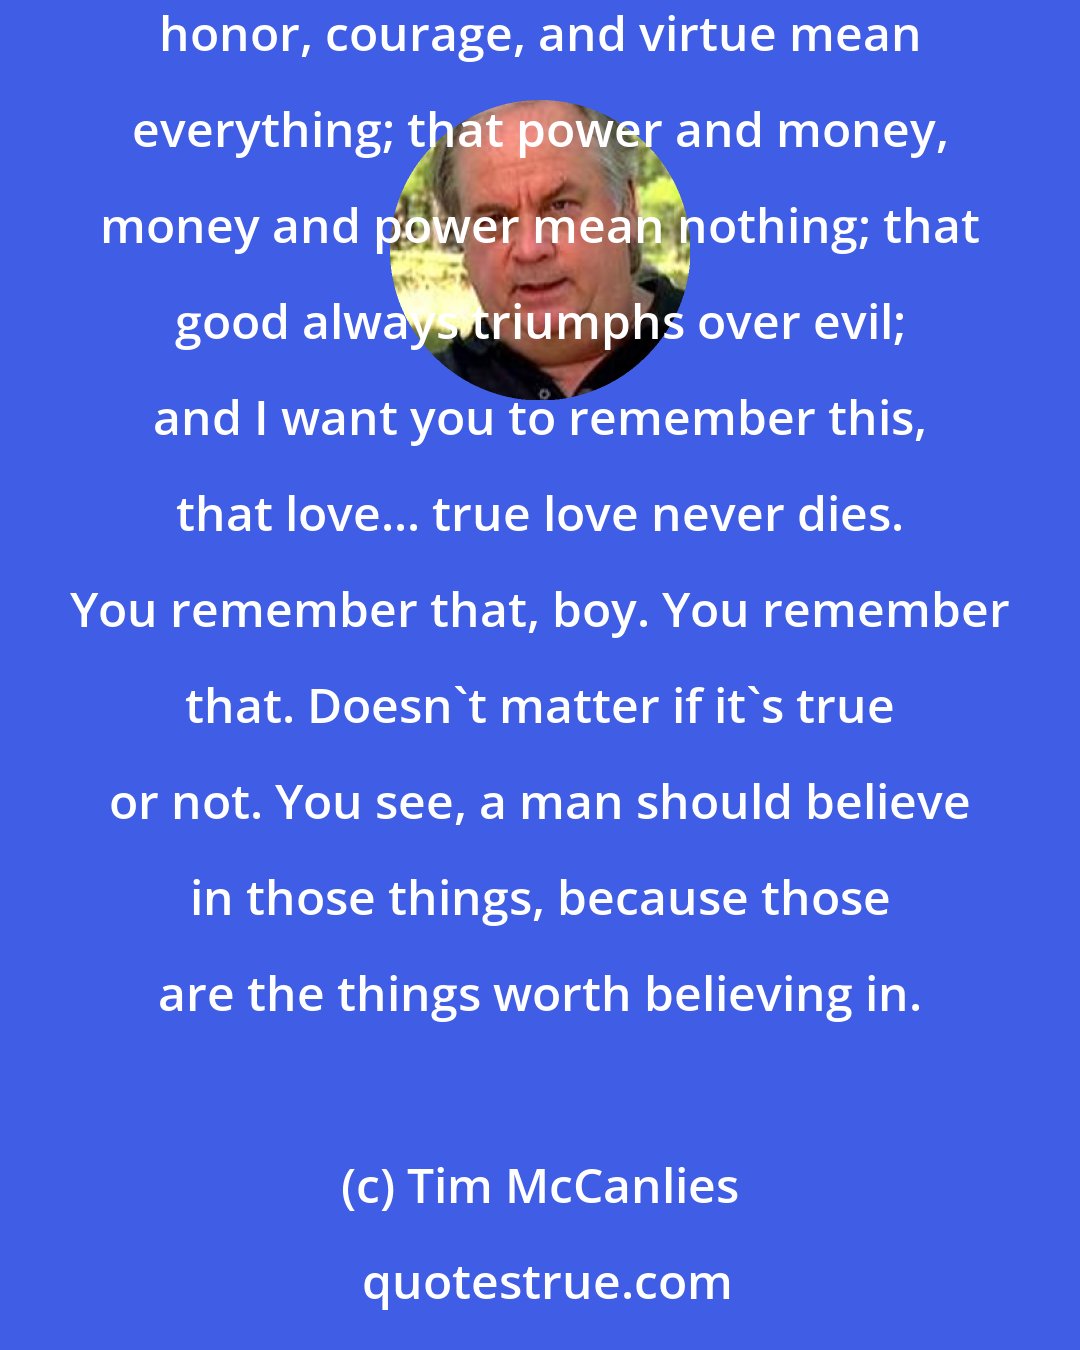 Tim McCanlies: Sometimes the things that may or may not be true are the things a man needs to believe in the most. That people are basically good; that honor, courage, and virtue mean everything; that power and money, money and power mean nothing; that good always triumphs over evil; and I want you to remember this, that love... true love never dies. You remember that, boy. You remember that. Doesn't matter if it's true or not. You see, a man should believe in those things, because those are the things worth believing in.